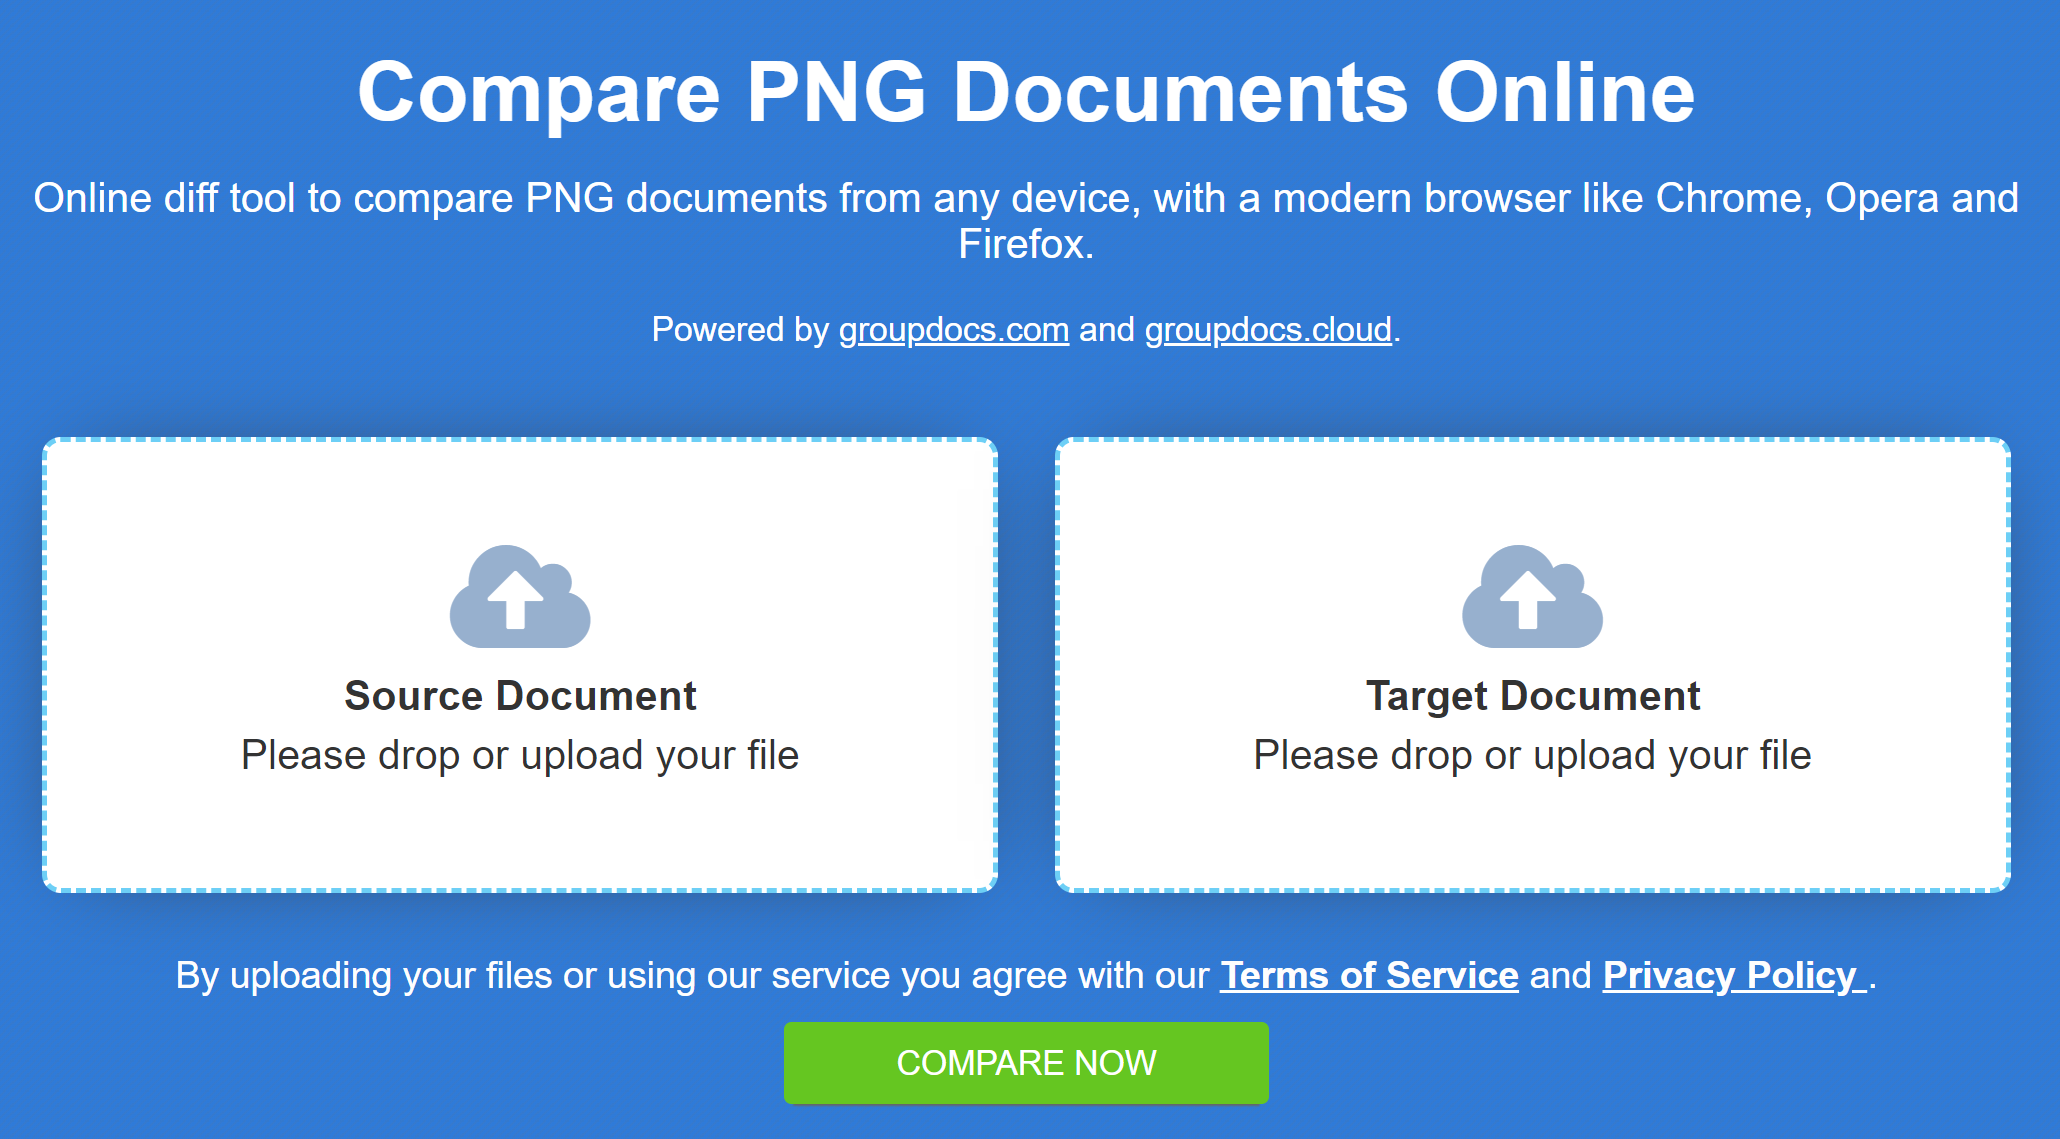 Online diff tool to compare PNG images